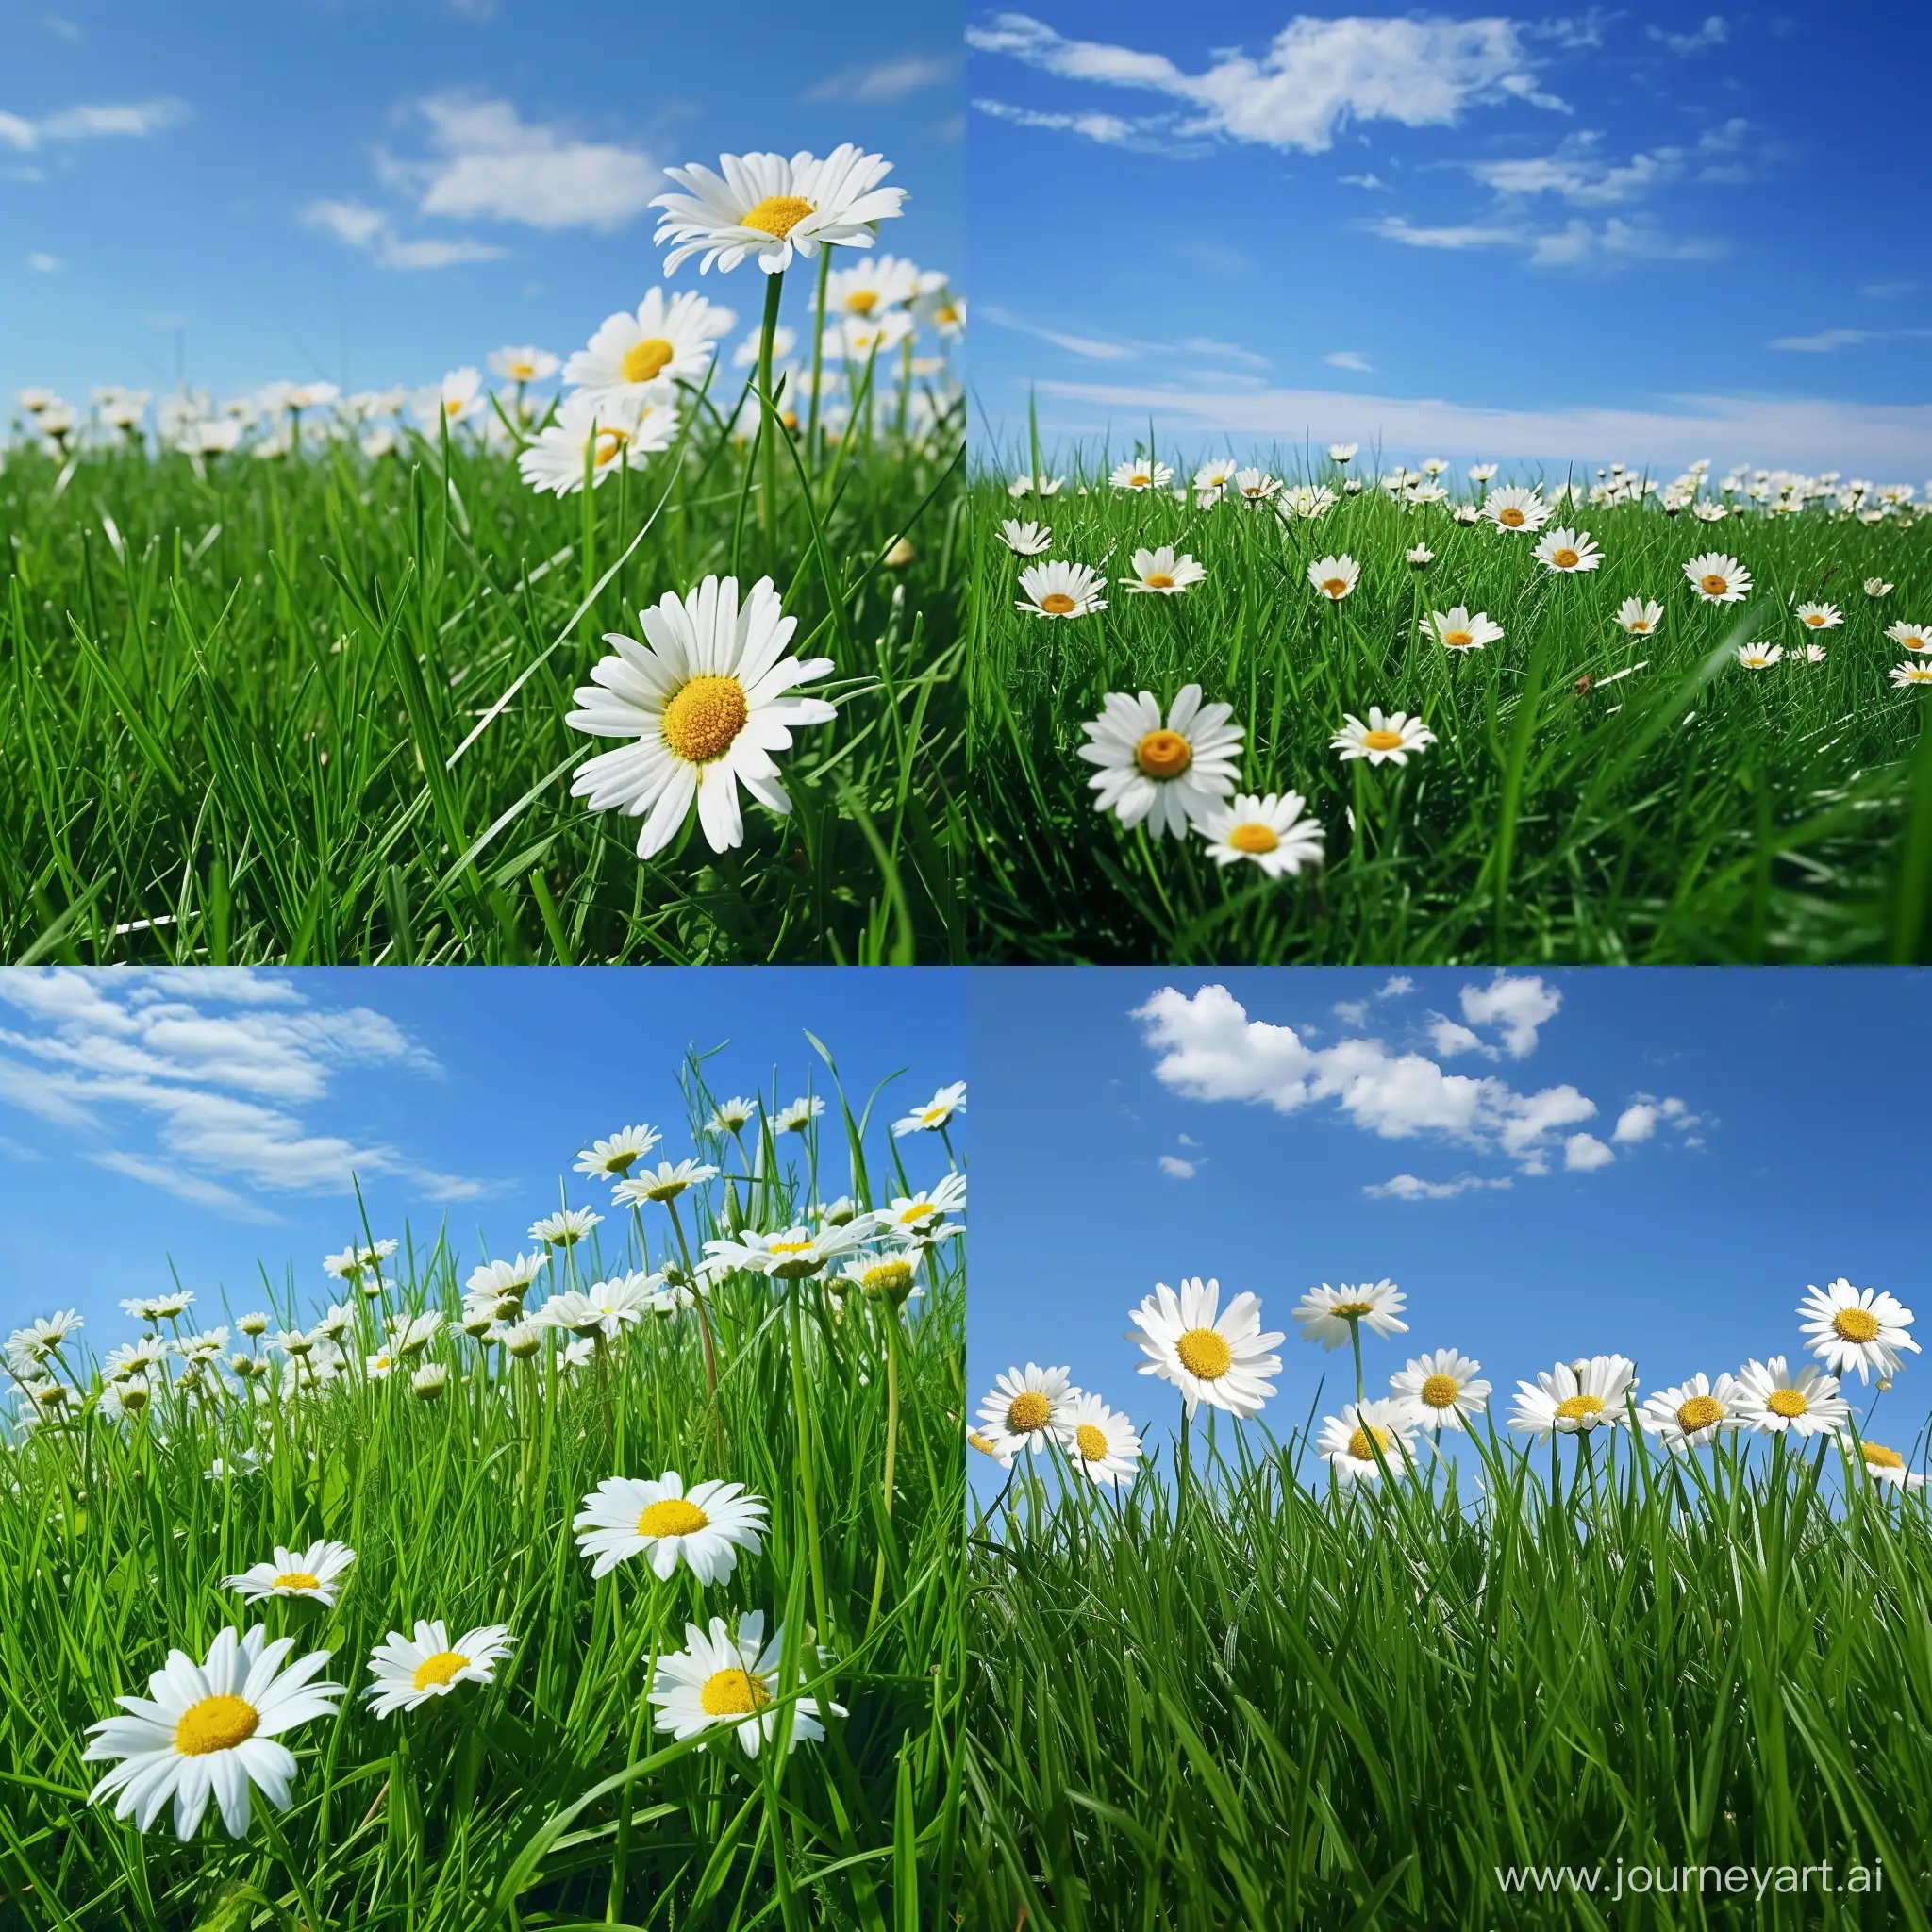 a beautiful natural landscape of a field of white daisies and green grass under a clear blue sky, Daisies: The flowers are in full bloom and have white petals and yellow centers. They are the main focus of the image and create a contrast with the green grass, Grass: The grass is lush and dense, indicating a healthy and fertile environment. The grass covers most of the ground and provides a background for the daisies, Sky: The sky is mostly clear with a few scattered clouds, suggesting a sunny and pleasant day. The sky occupies the upper part of the image and adds a sense of depth and openness to the scene, Angle: The angle of the photo is low, close to the ground, giving an immersive perspective as if one is lying on the grass and observing the flowers. The angle also shows the expanse of the field and the sky in the background